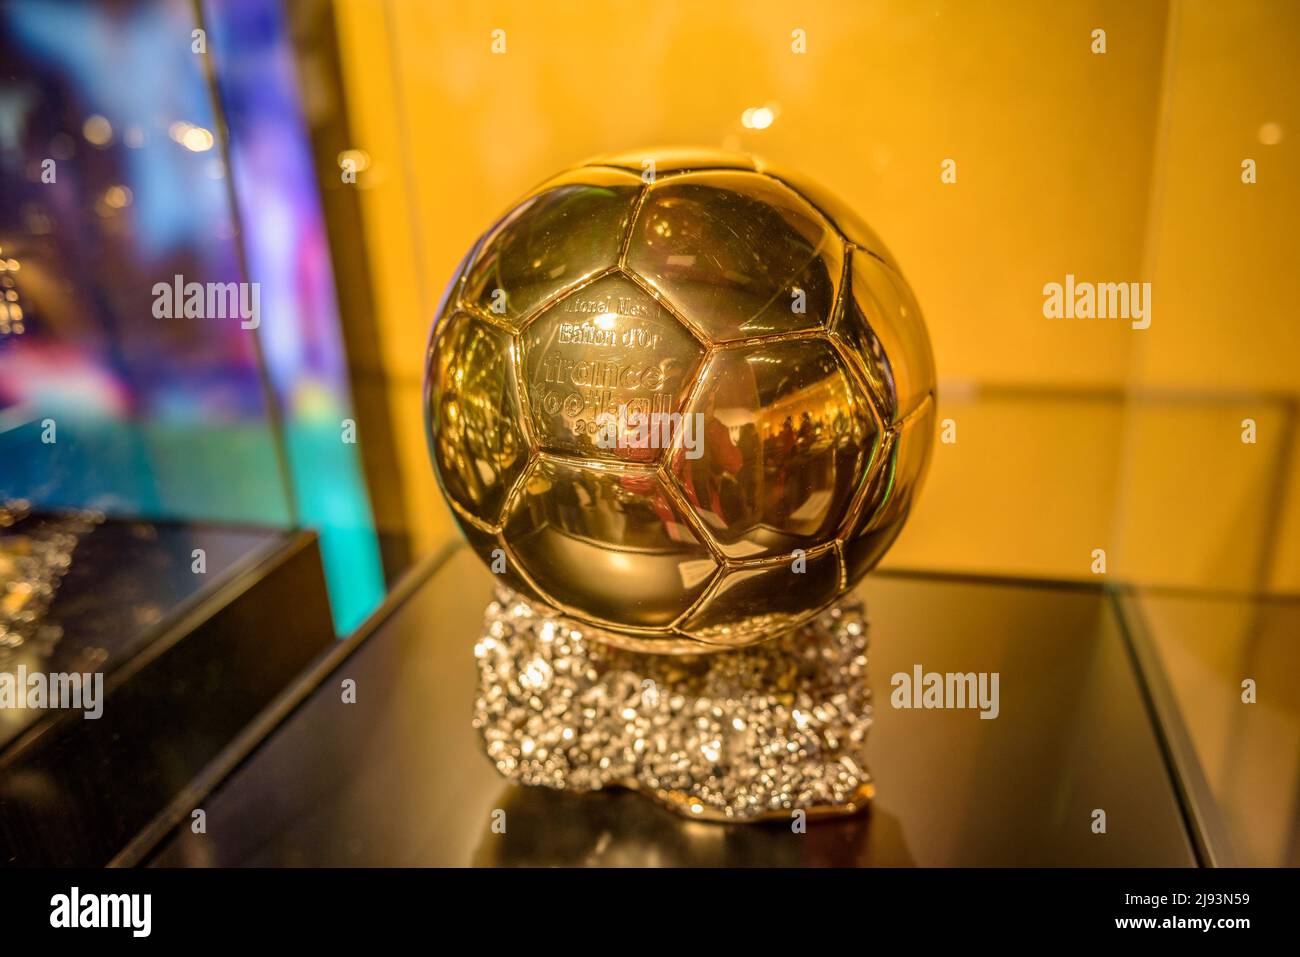 Golden Ball to the best player in the world given to Leo Messi and exhibited in the Messi space of the FC Barcelona museum, at the Camp Nou, Barcelona Stock Photo